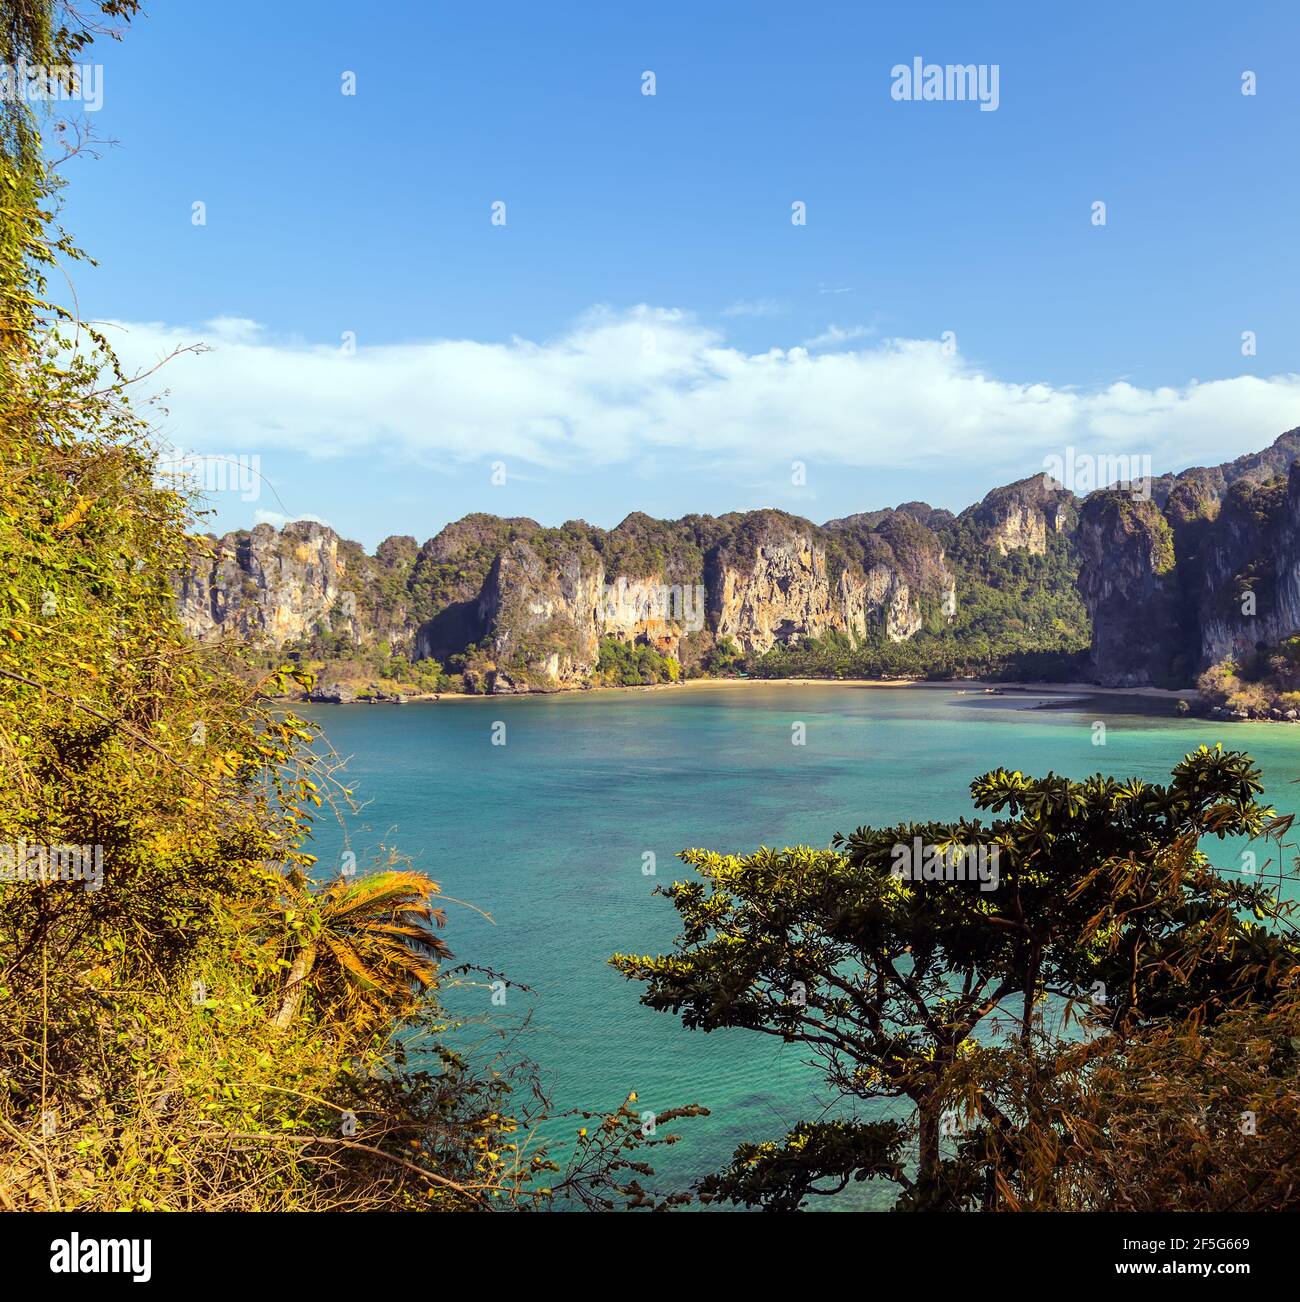 Limestone karsts landscape Railay beach nature scenery. Country Scenic Image Tourism Krabi and Ao Nang in Thailand. Beautiful nature landscape backgro Stock Photo